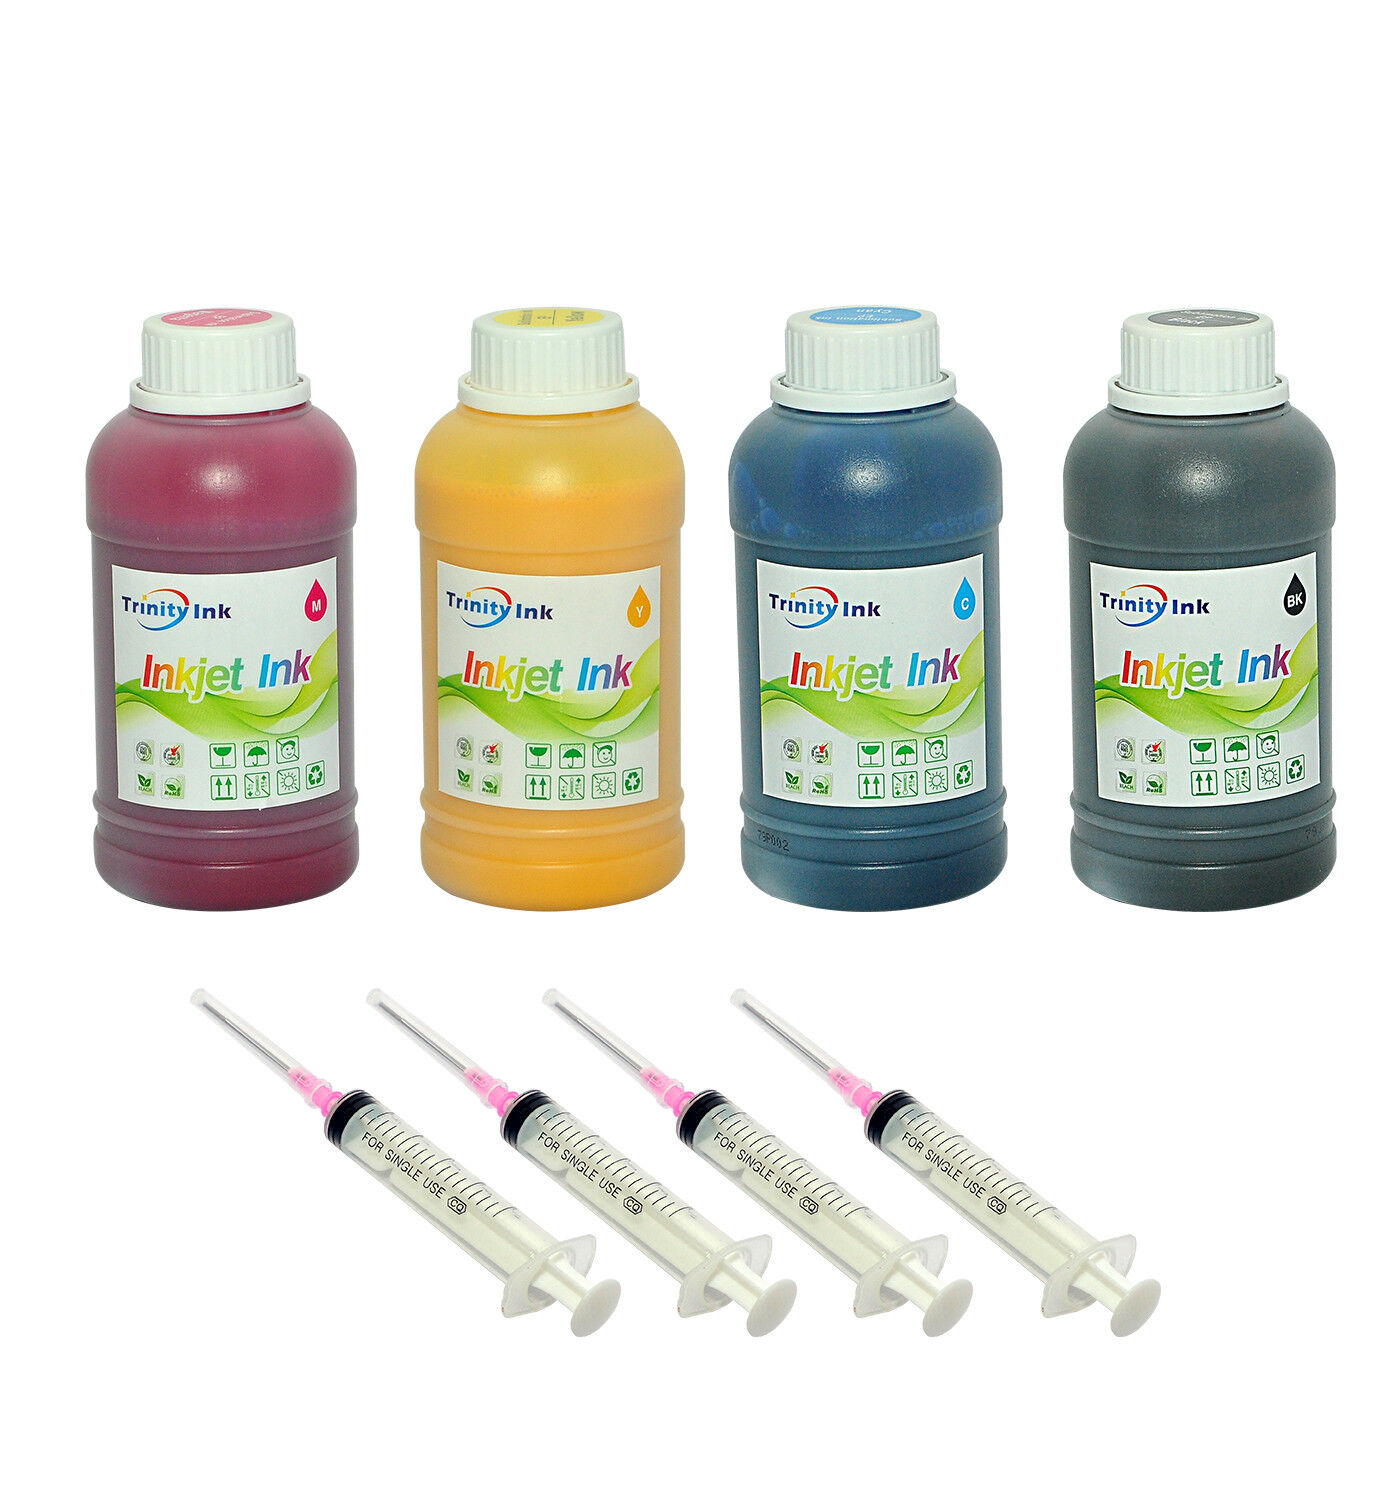 Trinity 1000ml sublimation ink kit for all Epson inkjet printers